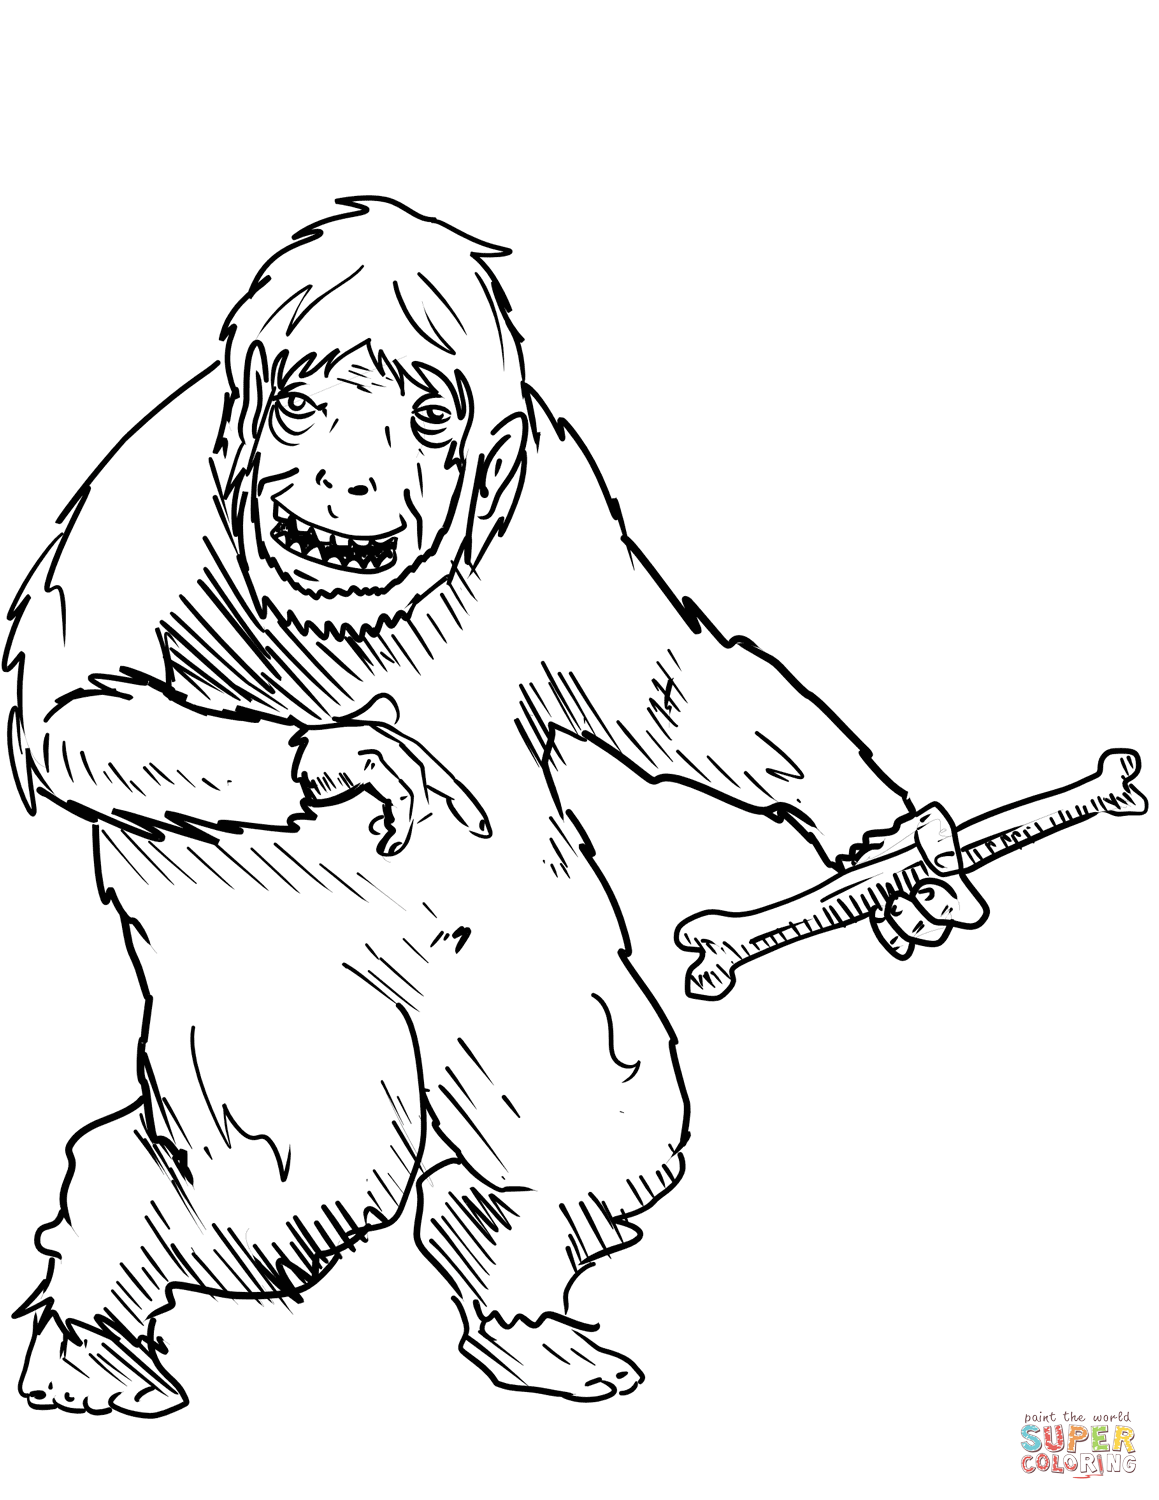 Yeti & Bigfoot coloring pages | Free Coloring Pages